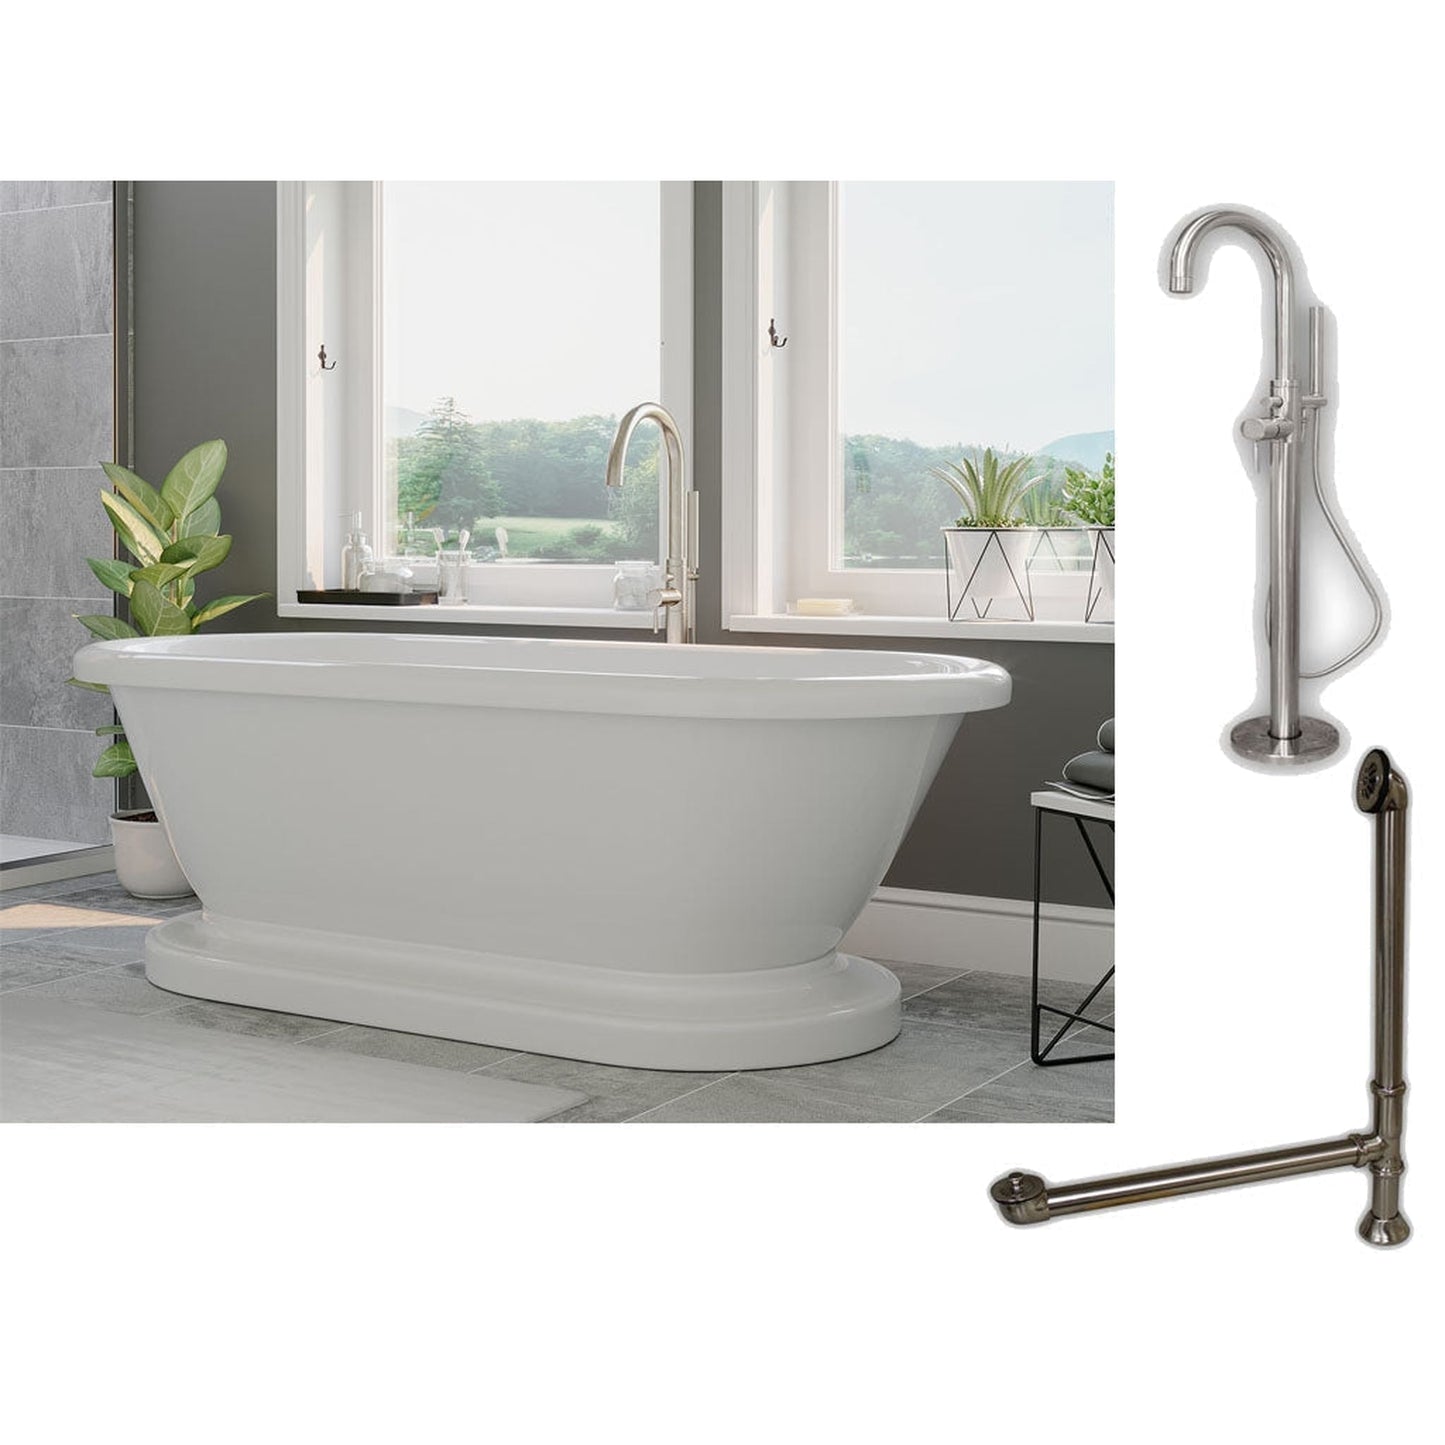 Cambridge Plumbing 70" White Acrylic Double Ended Pedestal Bathtub With No Deck Holes And Complete Plumbing Package Including Modern Floor Mounted Faucet, Drain And Overflow Assembly In Polished Chrome